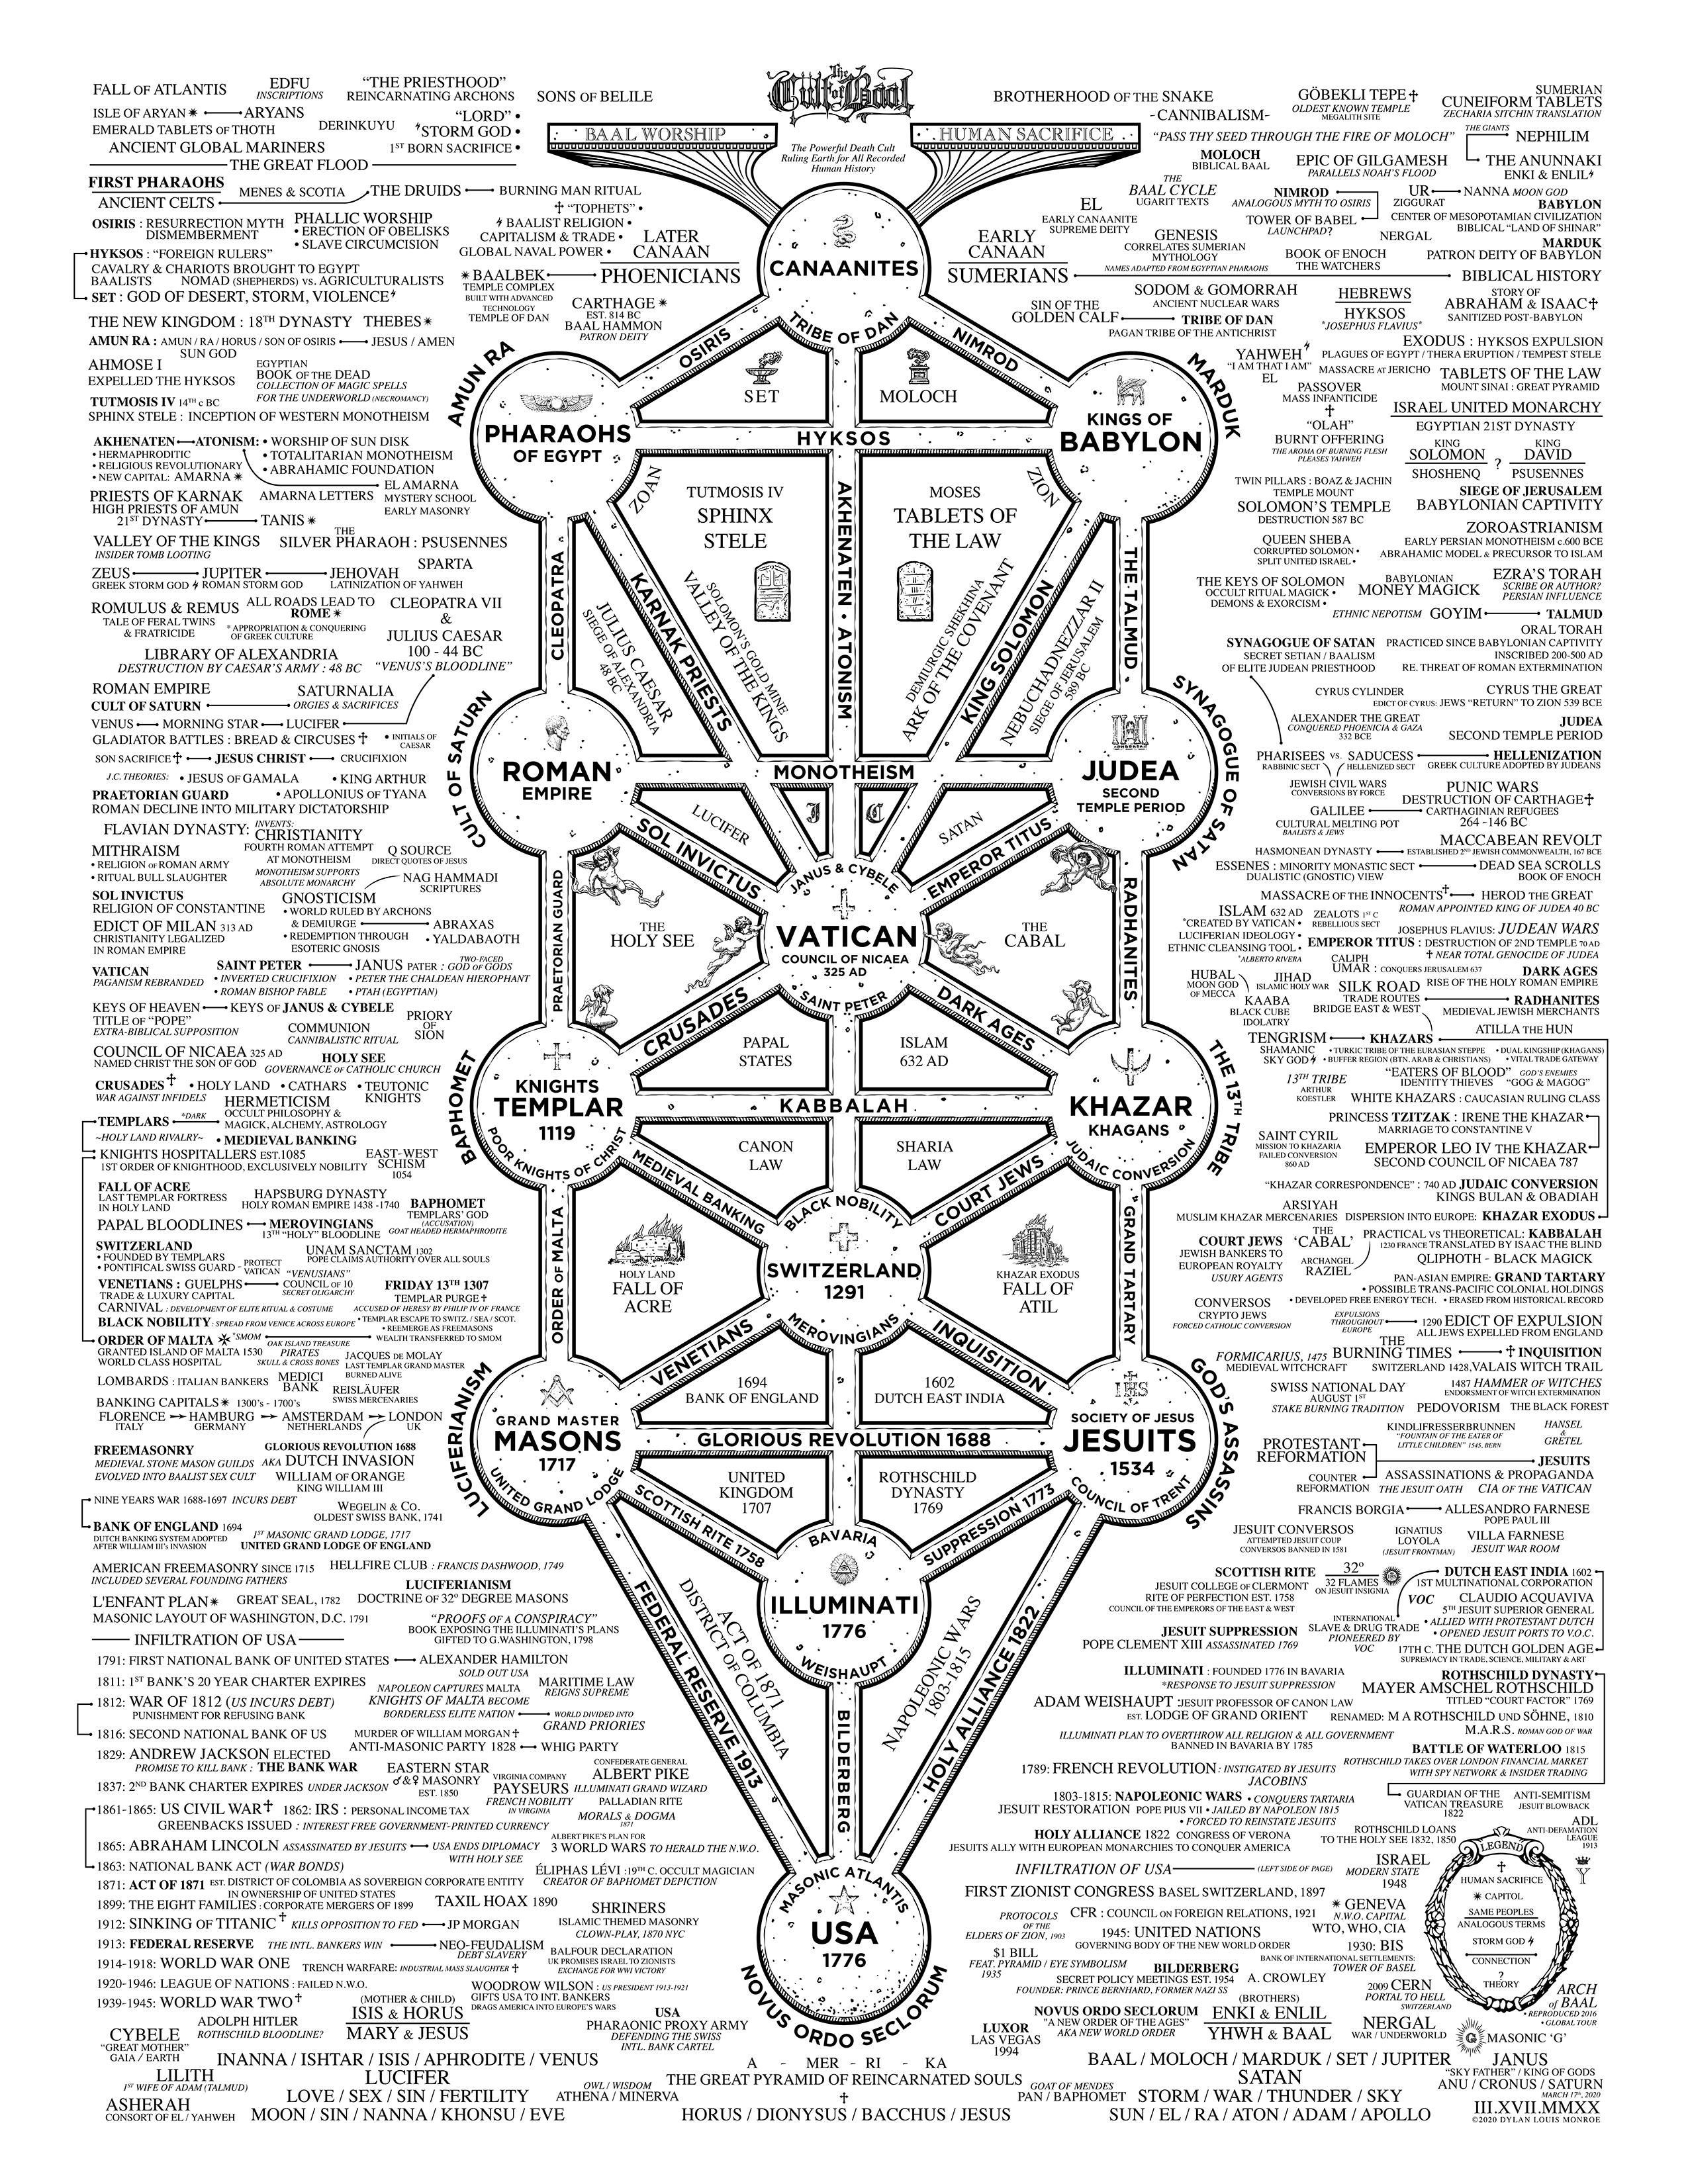 File:Conspiracy-theory-qanon-map-everything-is-connected-god-concept.jpeg